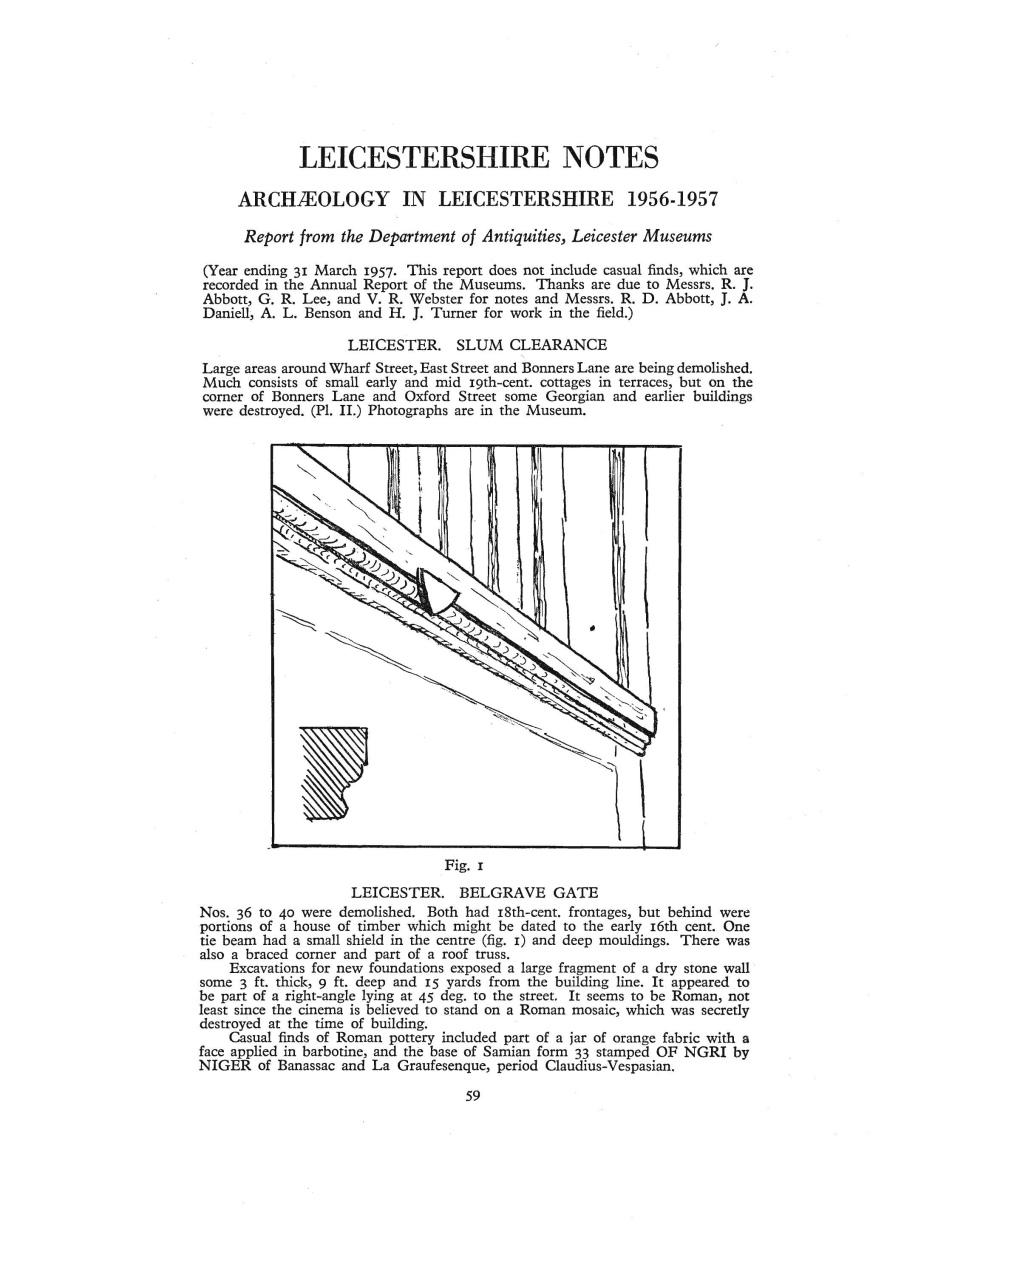 LEICESTERSHIRE NOTES ARCHJEOLOGY in LEICESTERSHIRE 1956-1957 Report from the Department of Antiquities, Leicester Museums